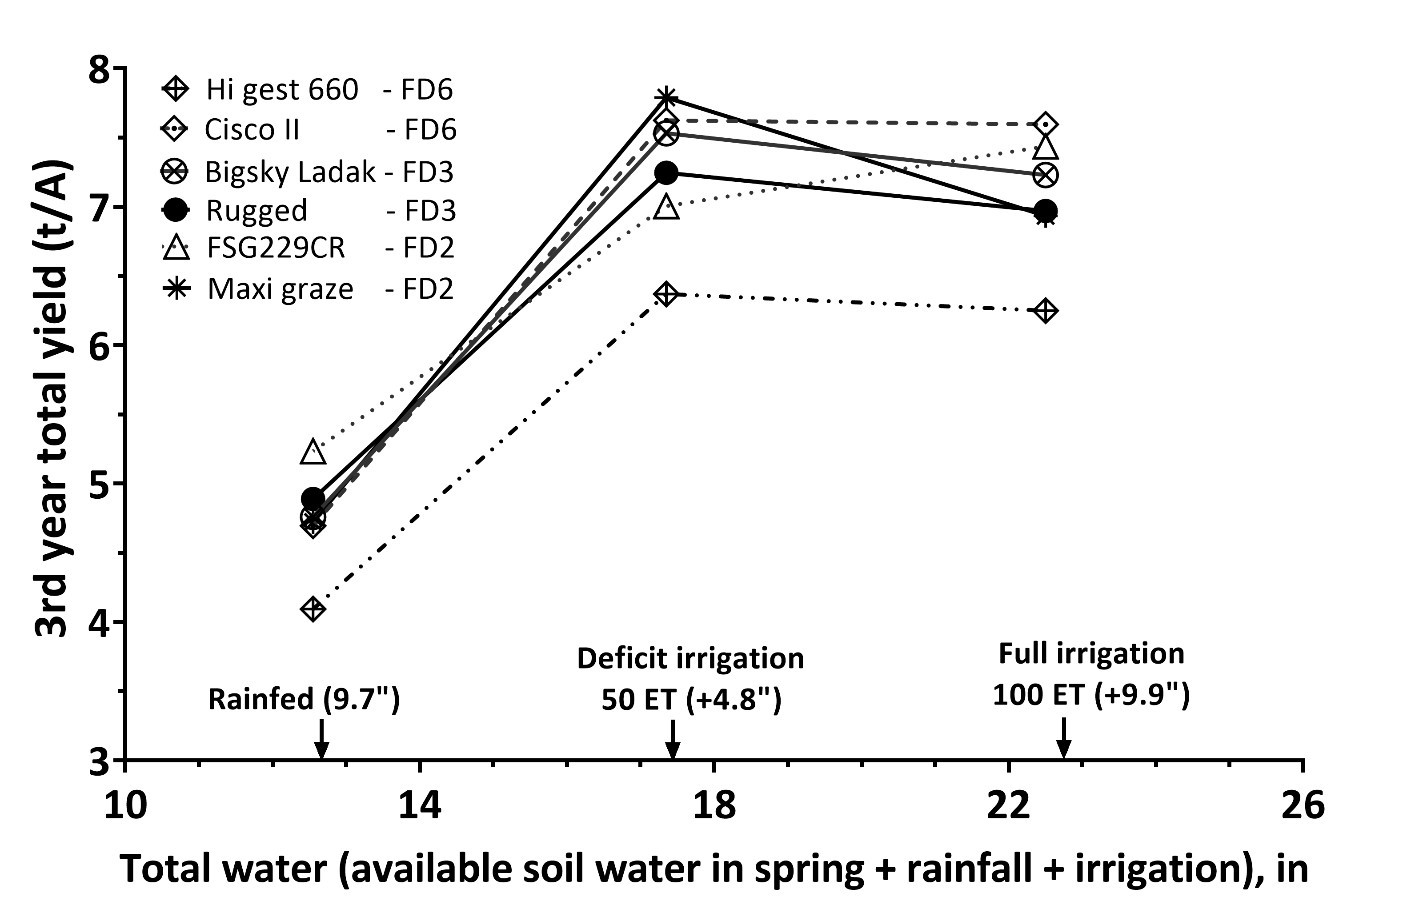 Line graph showing the moisture regime interaction with alfalfa varieties